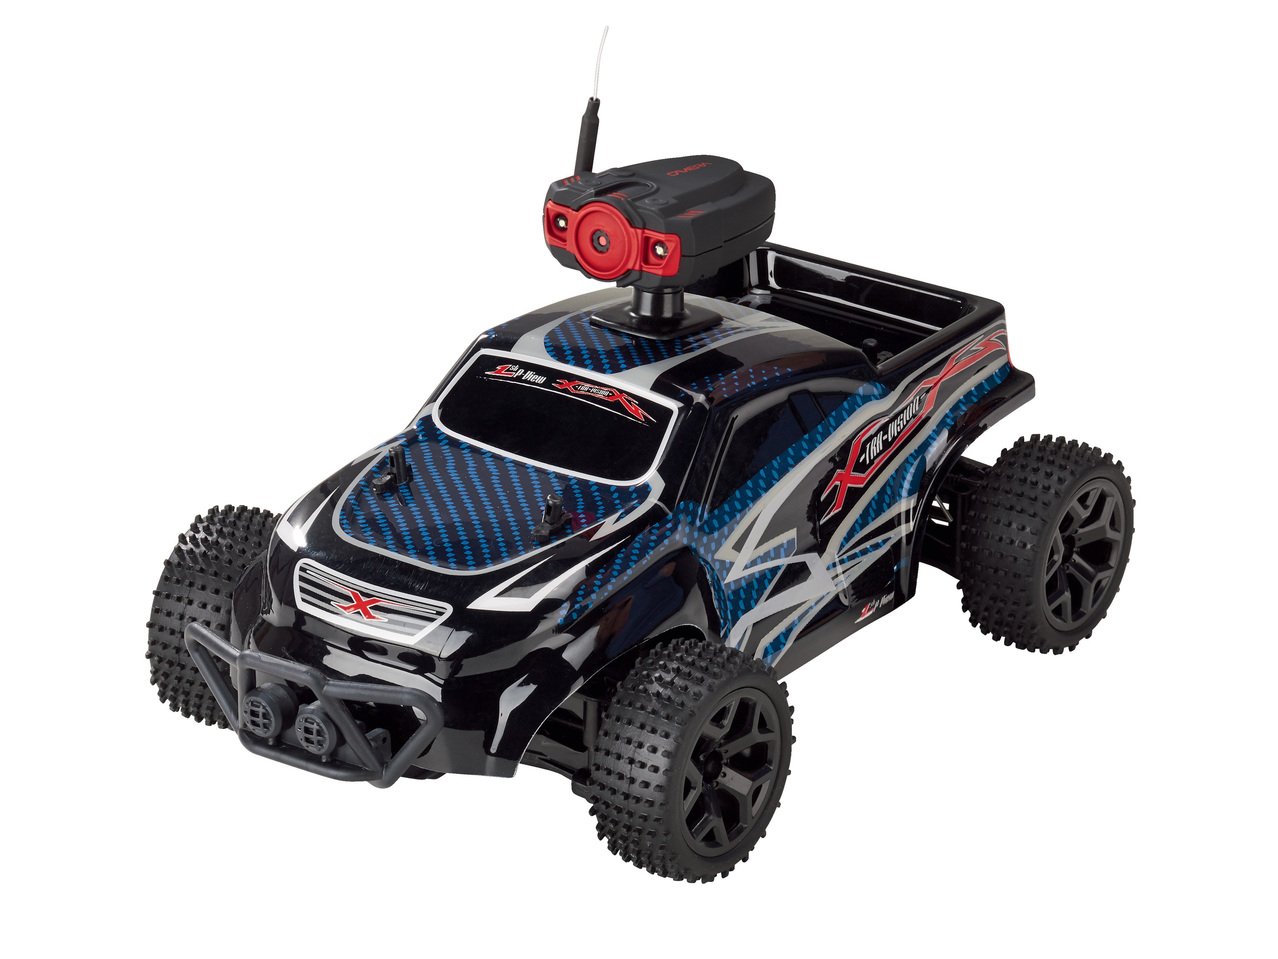 FPV Remote- Controlled Truck